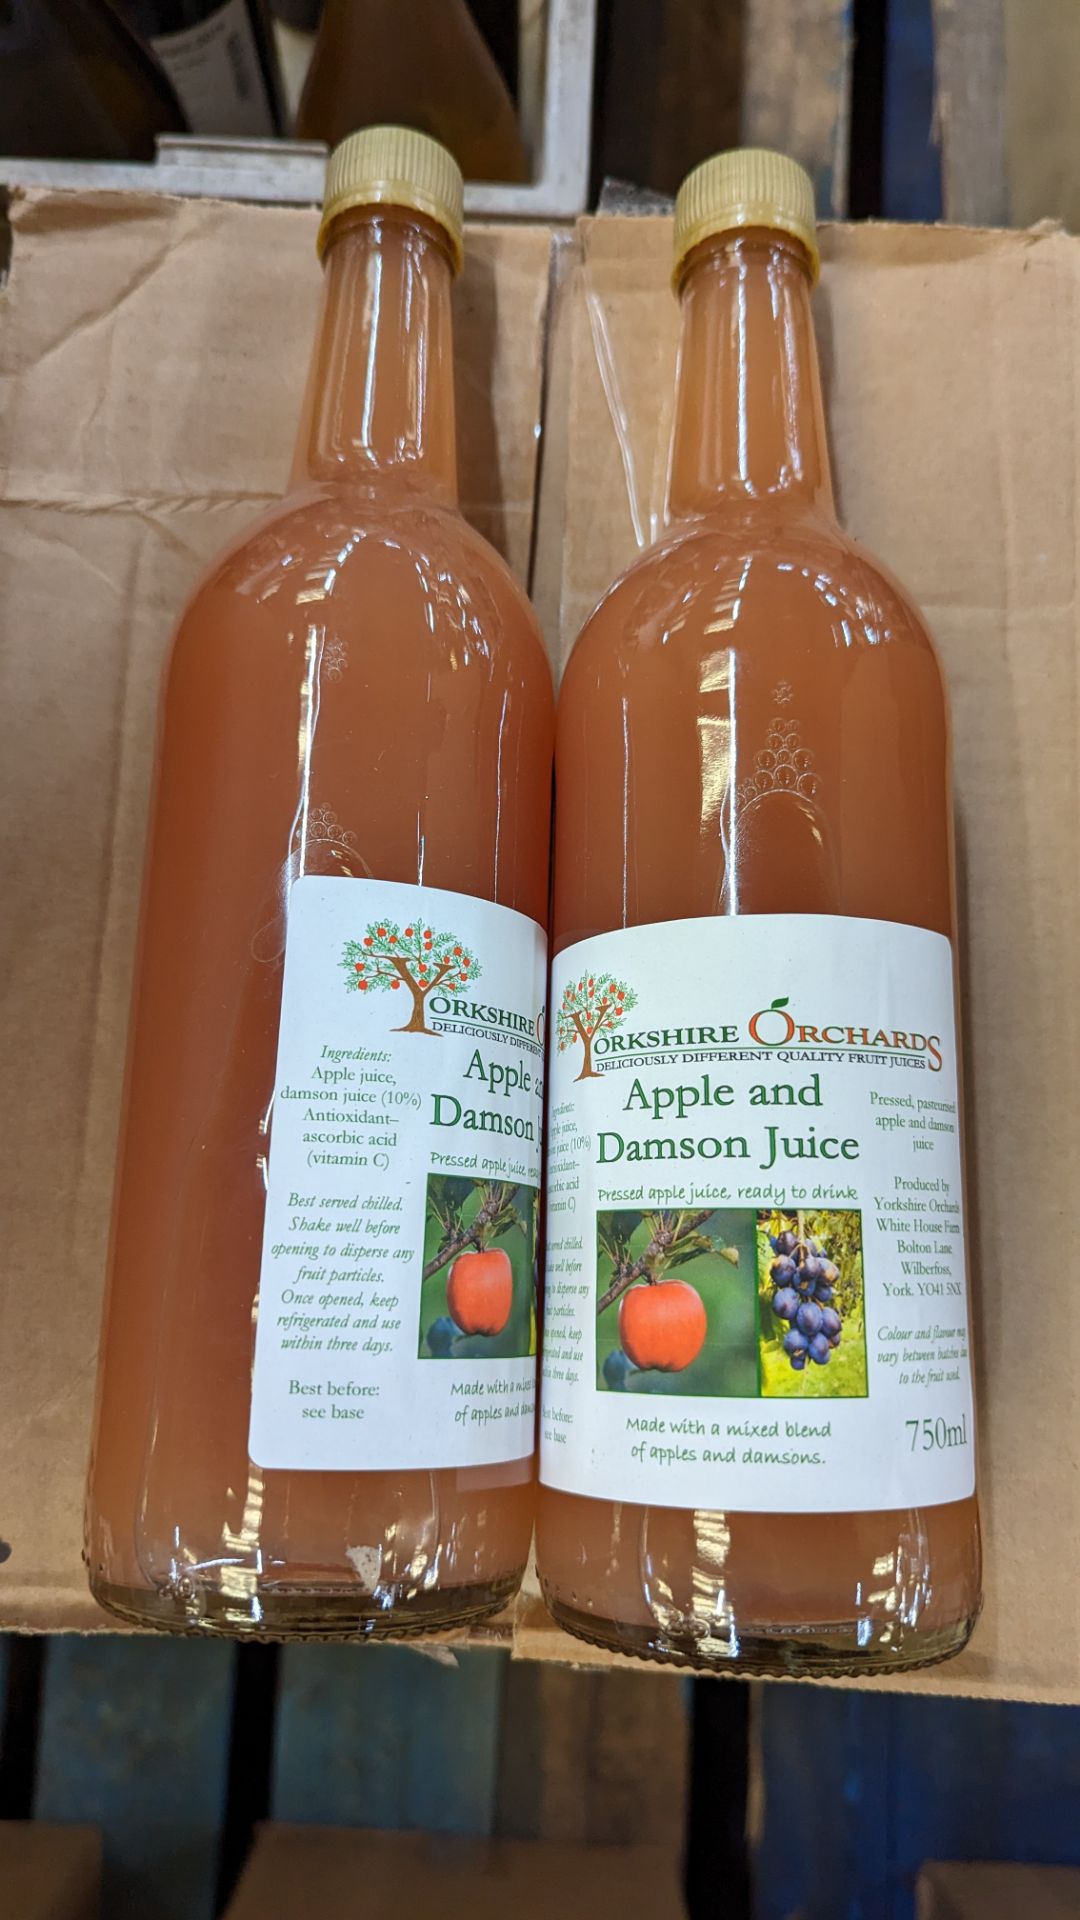 26 off 750ml bottles of Yorkshire Orchards apple & damson juice - Image 5 of 5